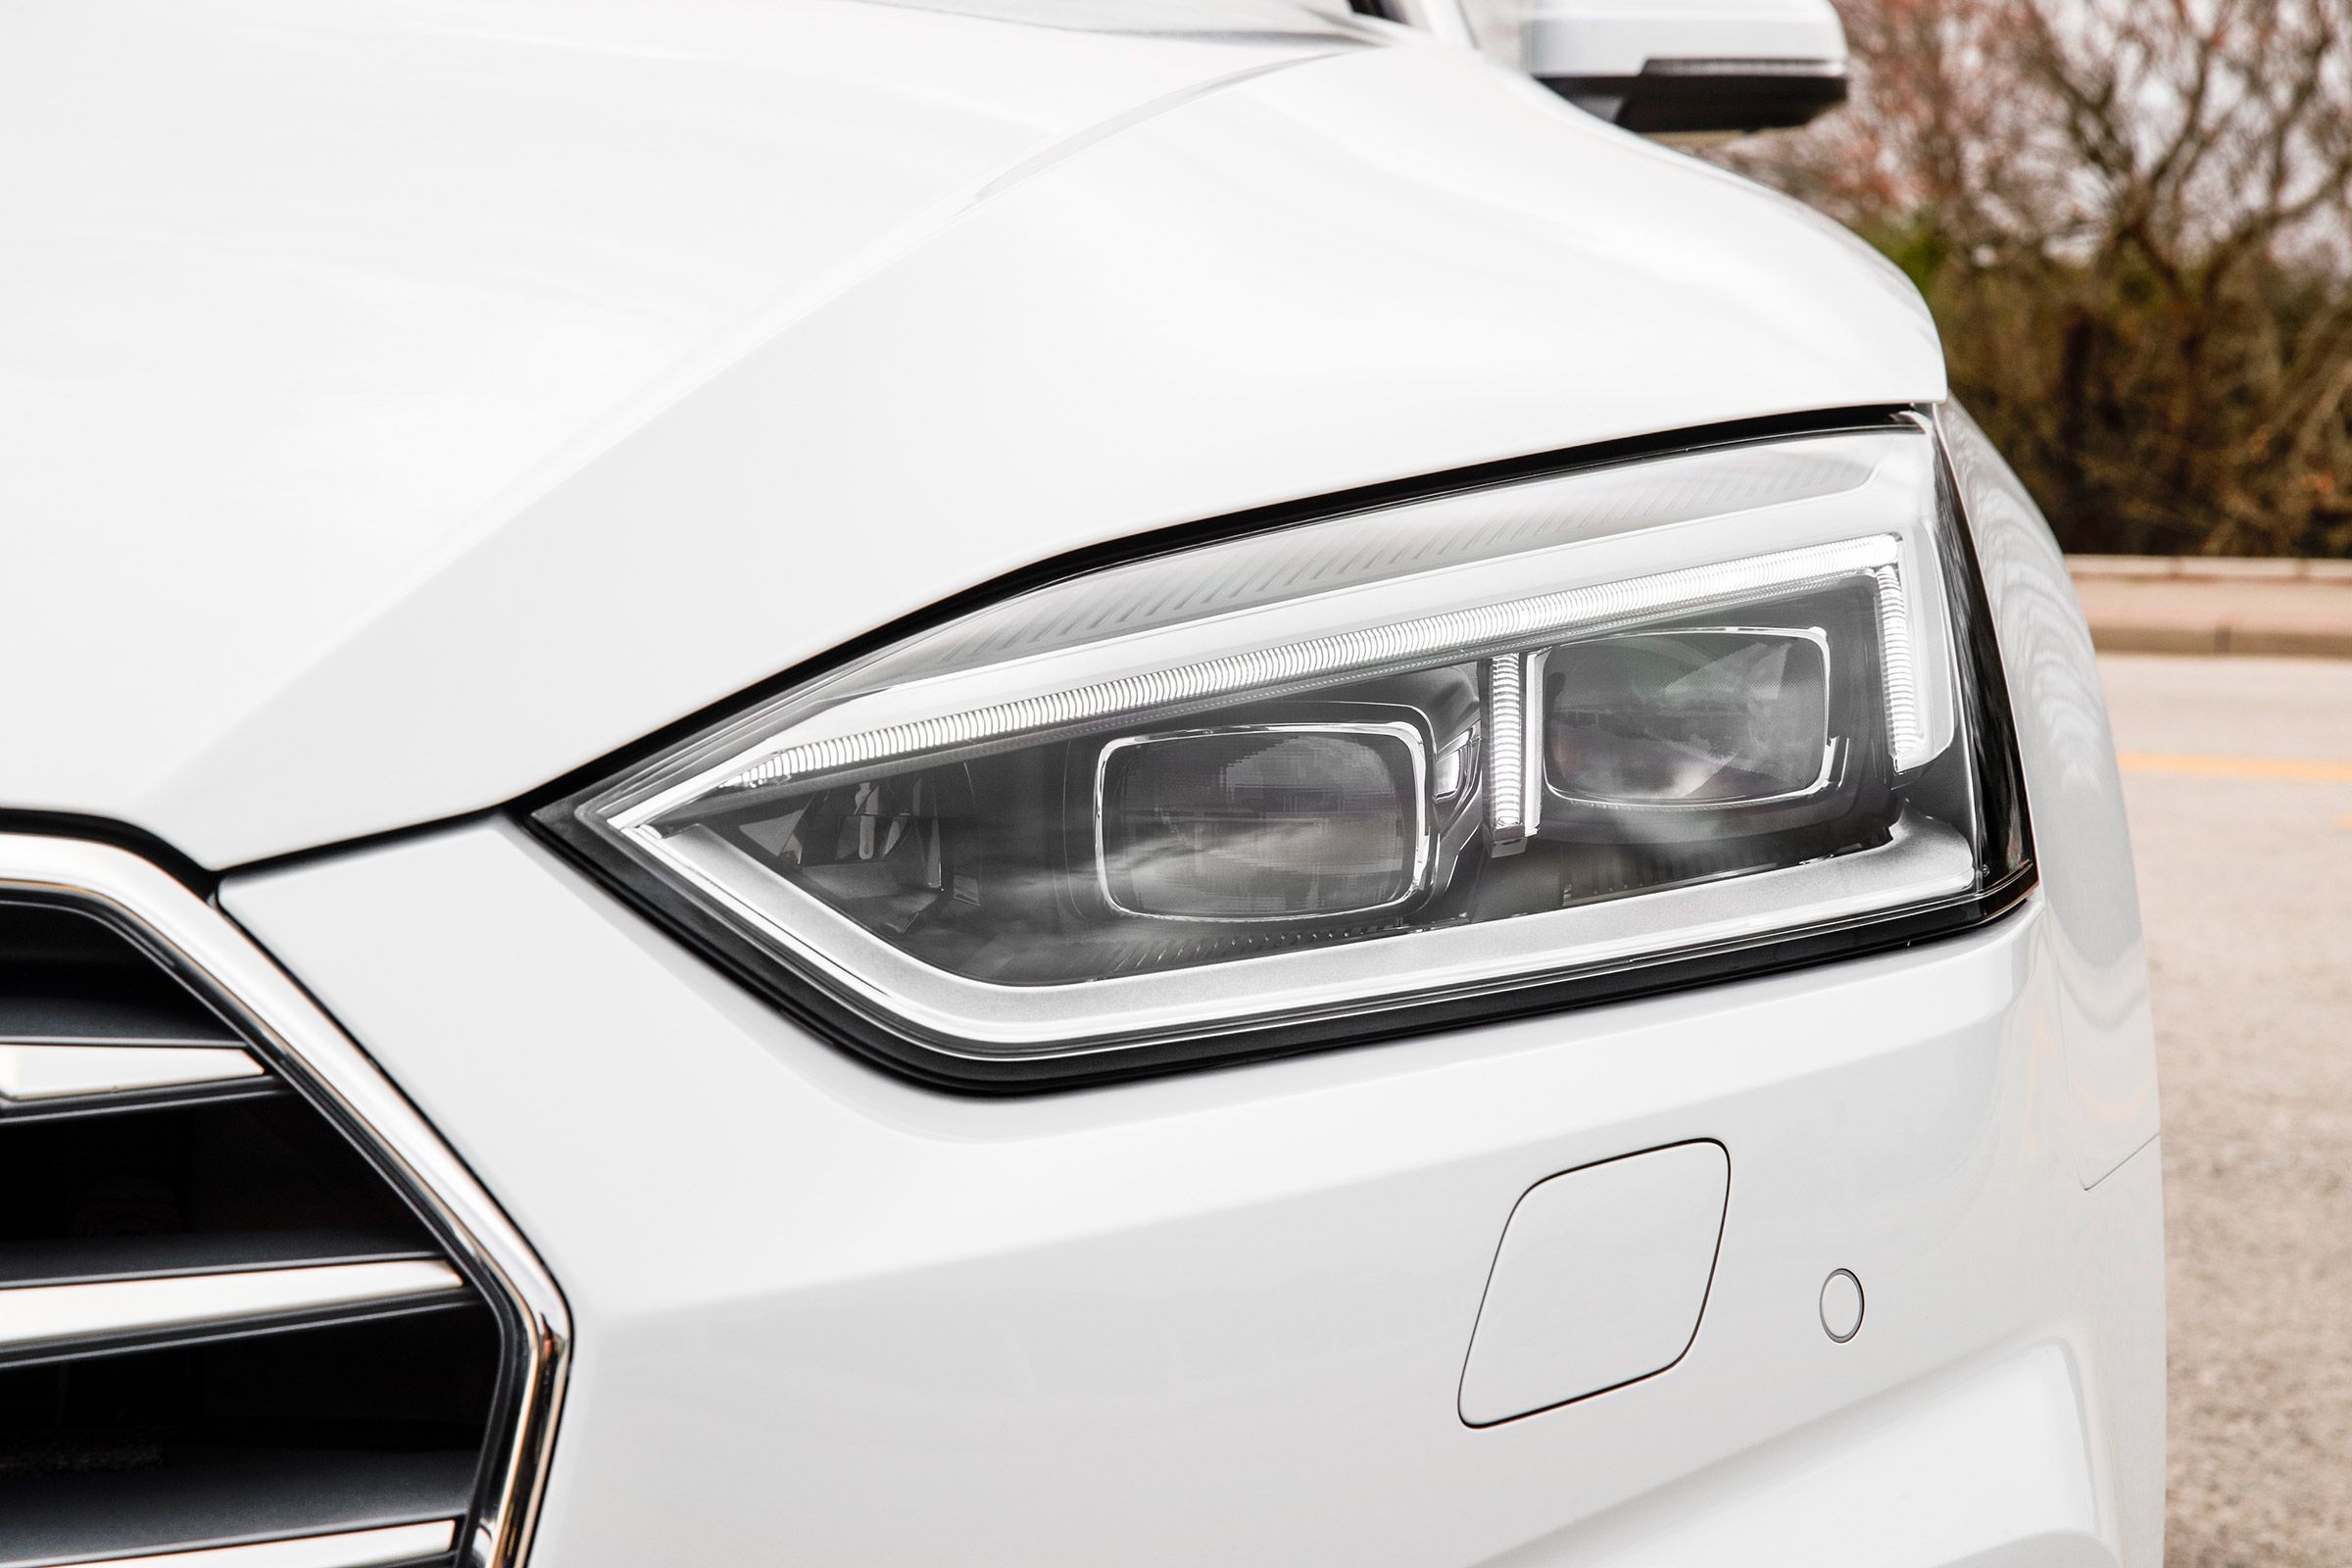 2017 Audi A5 Cabriolet Exterior View Headlight (View 1 of 18)